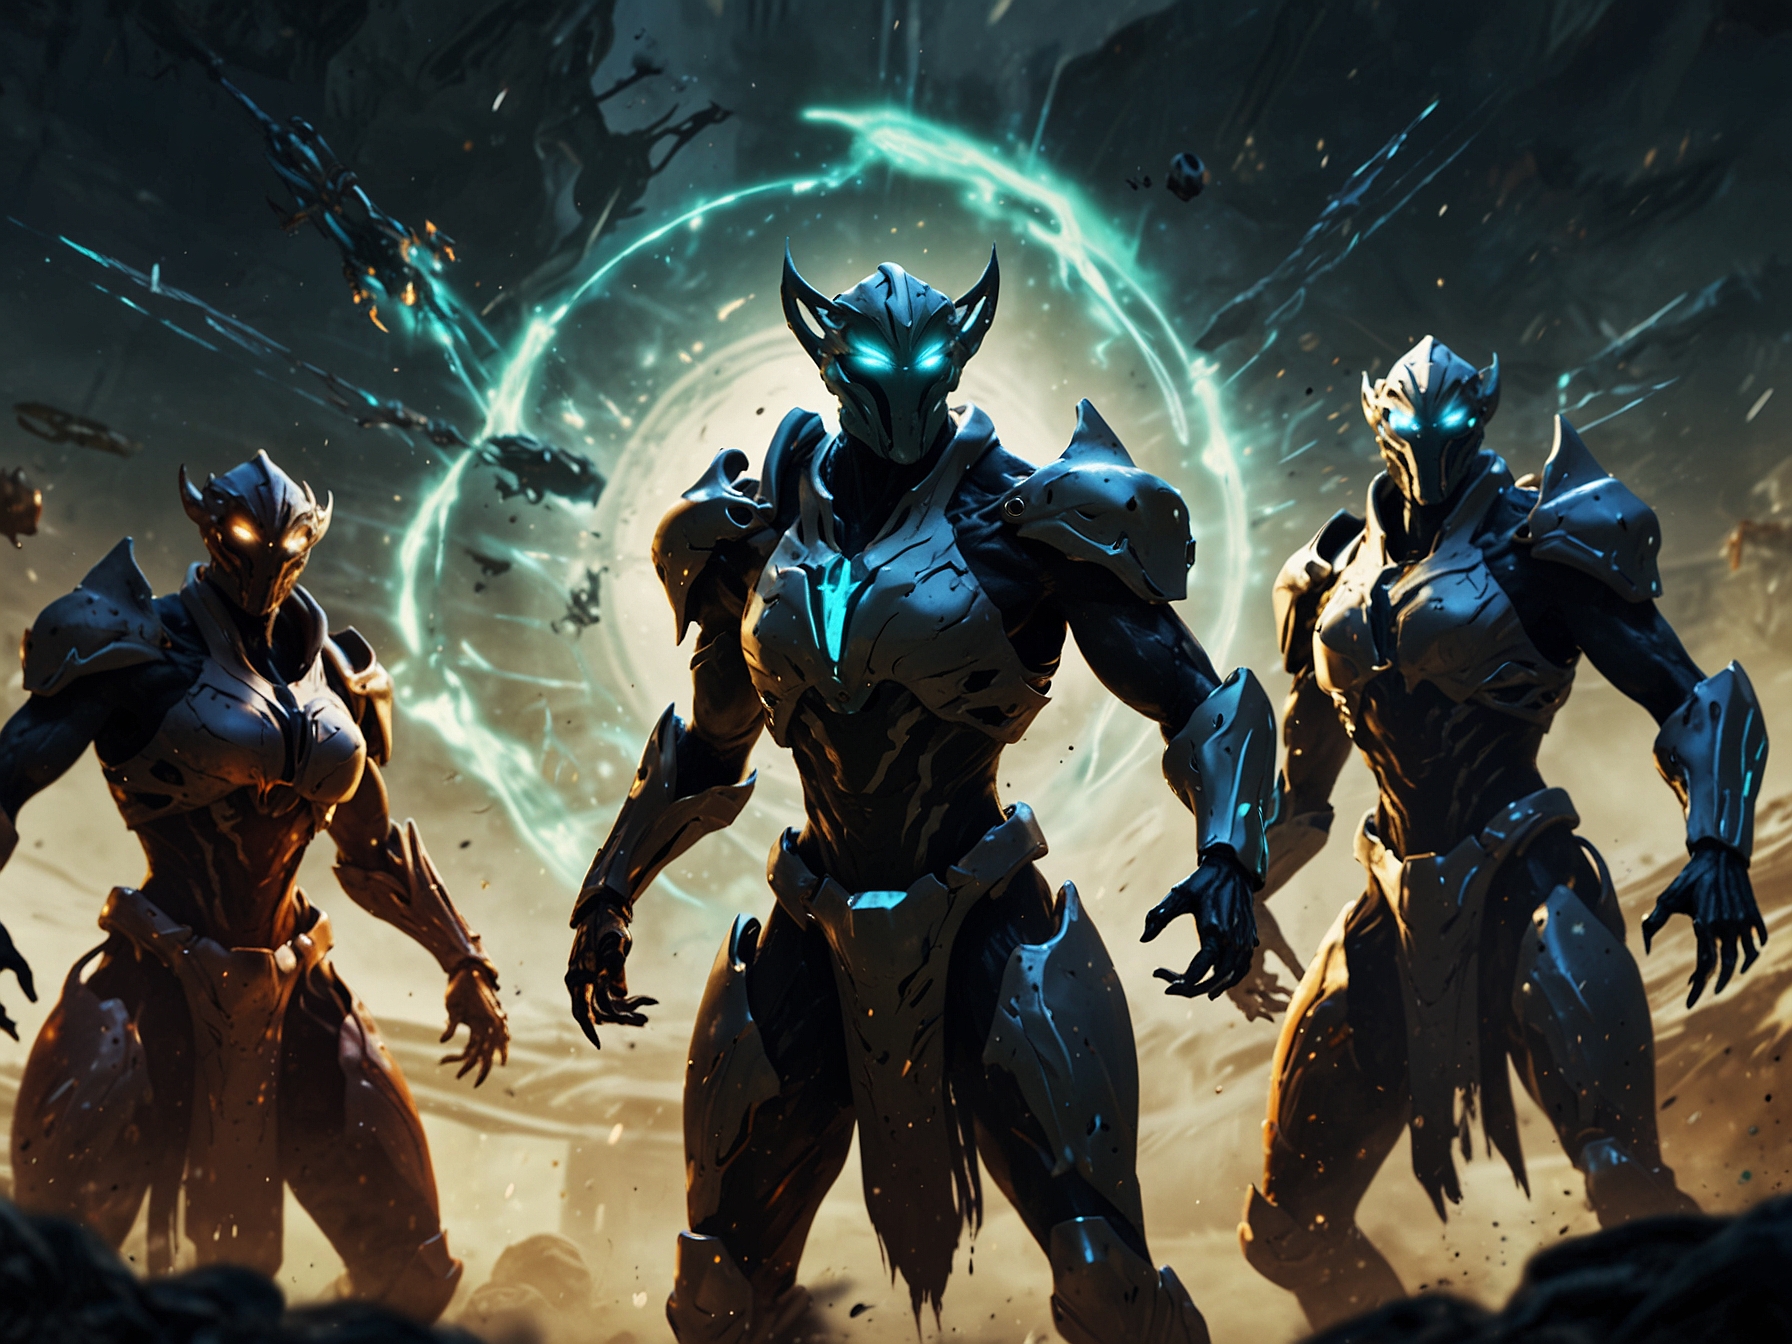 An in-game screenshot of Warframe's new Ascension game mode, showing players battling enemies with various Warframes, highlighting the challenging and rewarding gameplay.